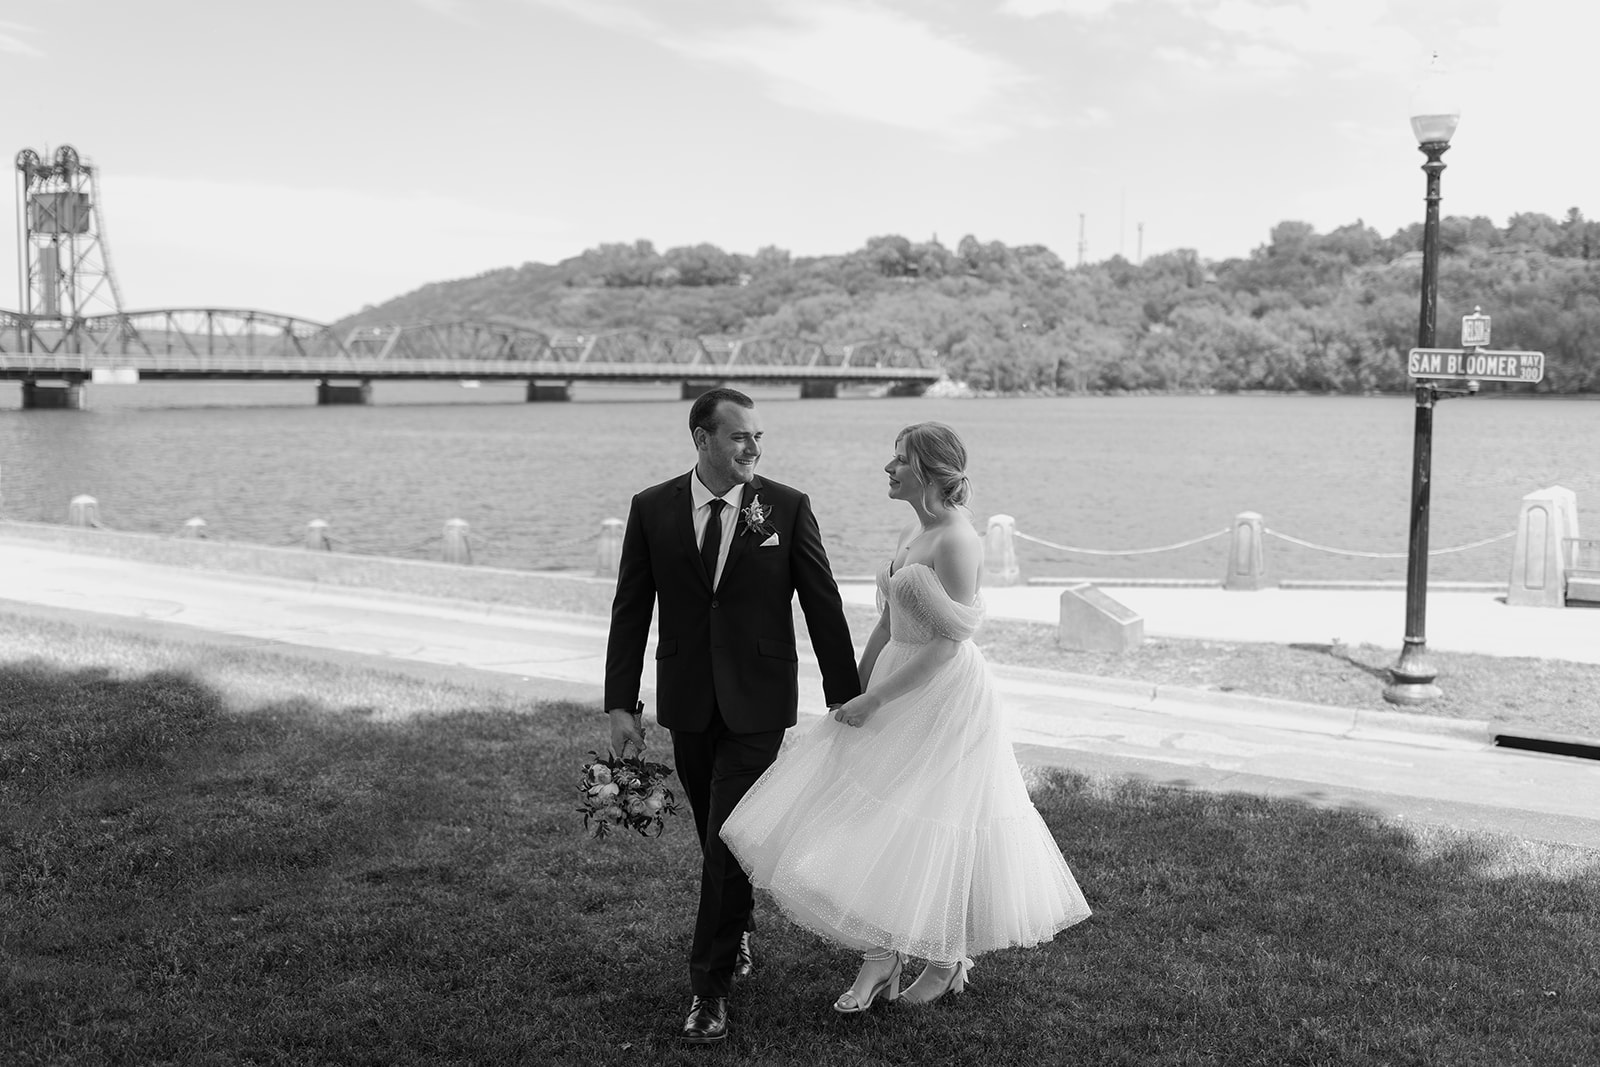 Bride and groom walking in front of a lift bridge on the St. Croix river